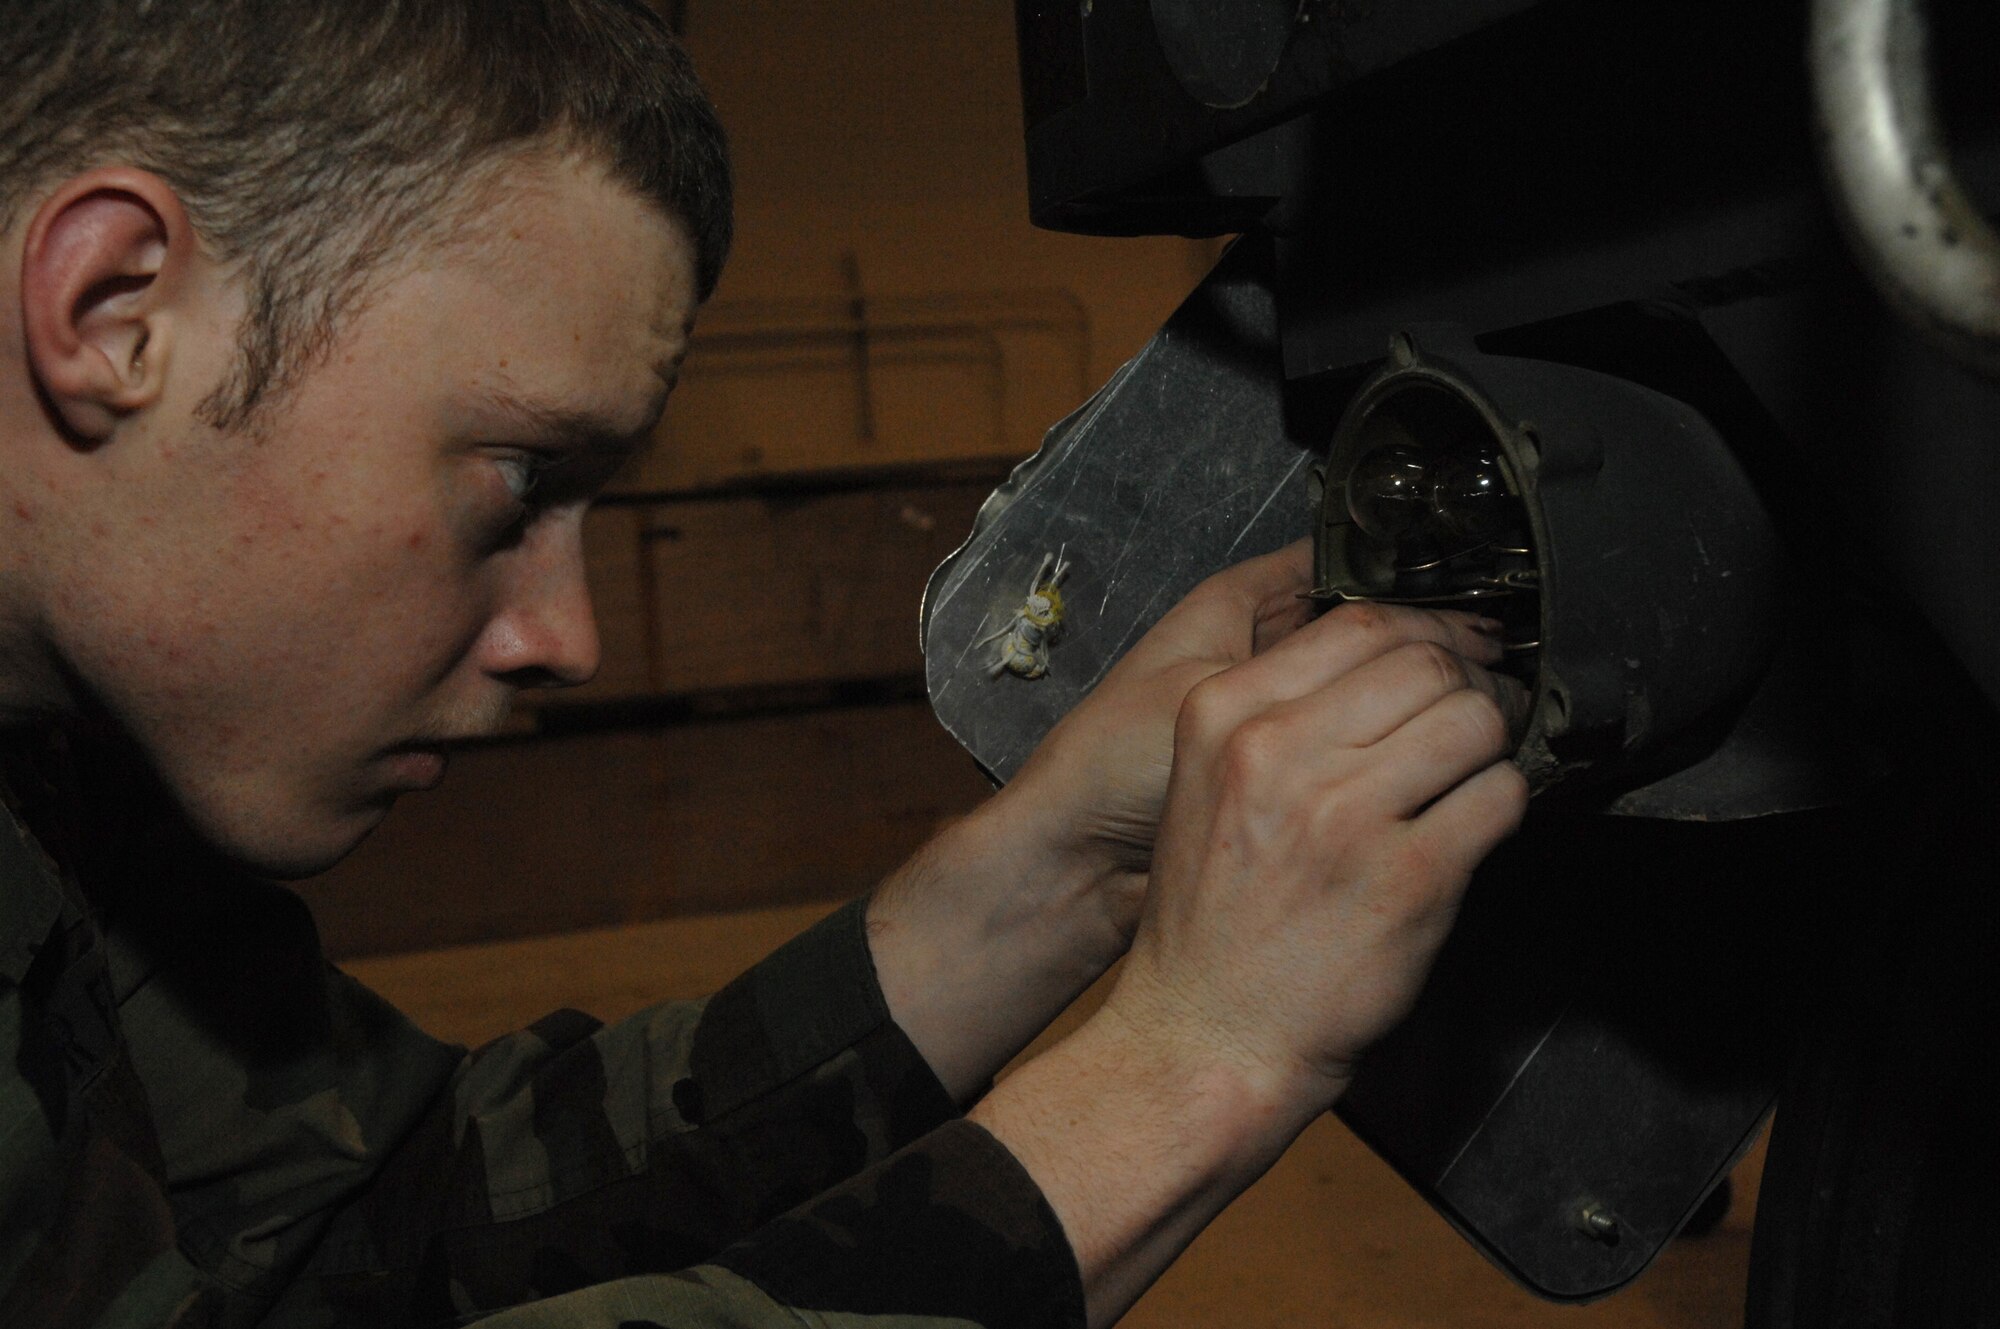 EIELSON AIR FORCE BASE, Alaska --  Airman First Class Daryl Mitchell, 354th Maintenance Squadron, 354th Fighter Wing, inspects a brake light assembly during a 365 inspection on an MHU-141/M Munitions Handling Trailer here on 13 December. The inspection is a yearly operational and maintenance check on the trailer which can be configured to carry different munition types. 
(U.S. Air Force Photo by Staff Sgt Joshua Strang)